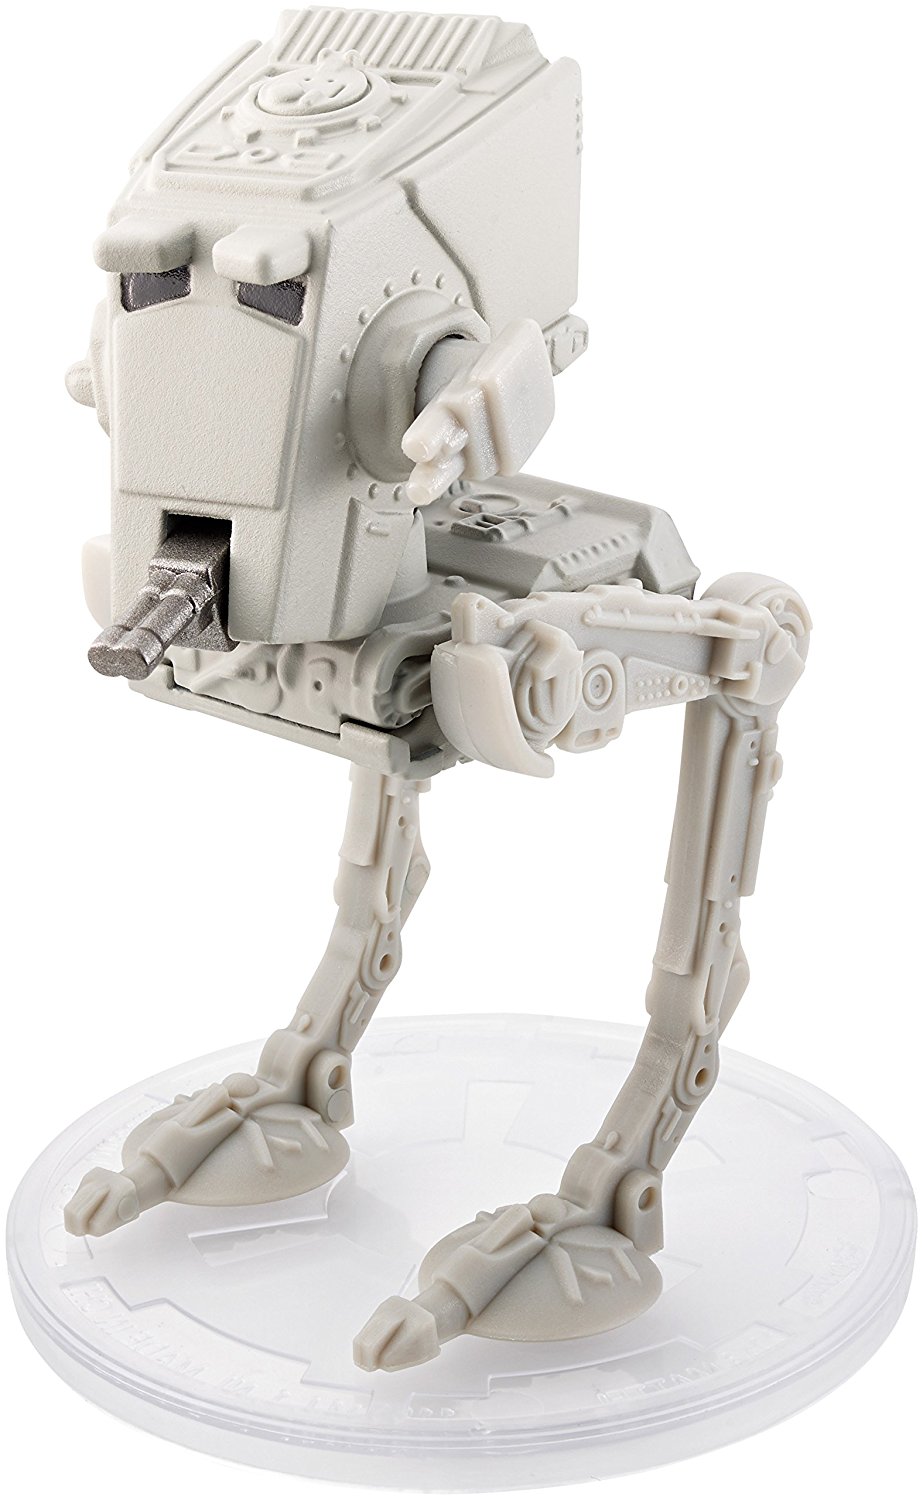 AT-ST (Rogue One)